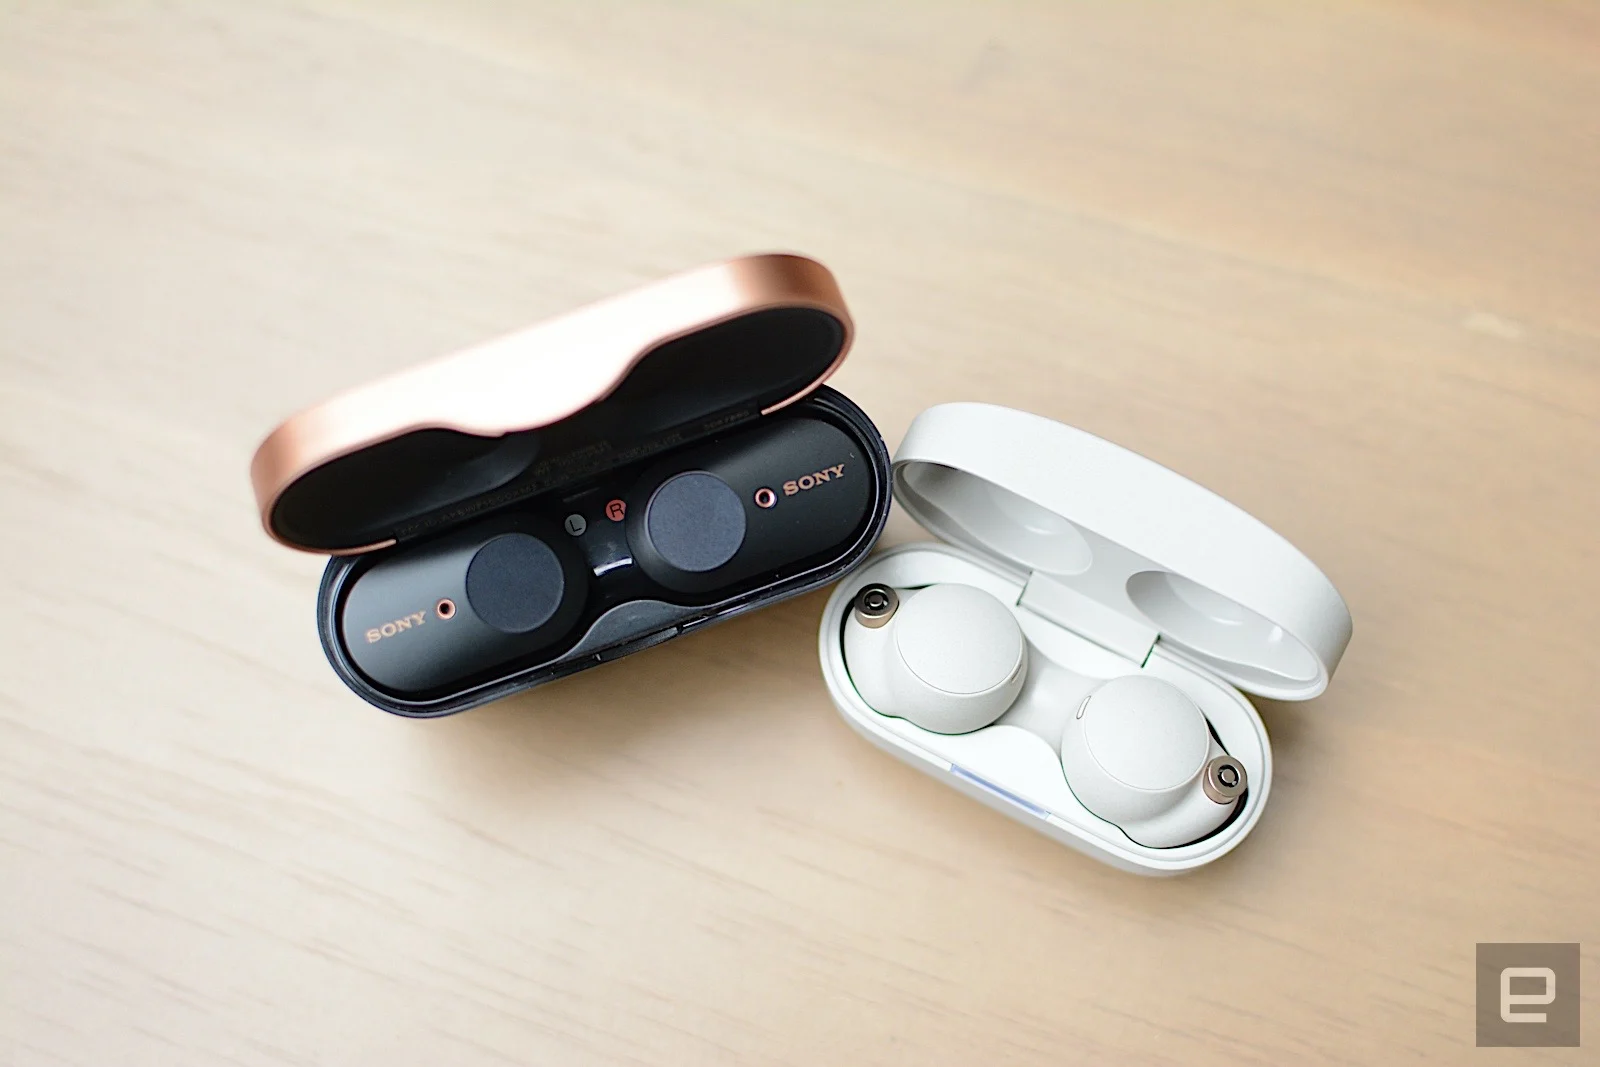 Sony WF-1000XM4 review: Excellent earbuds, awkward fit Engadget